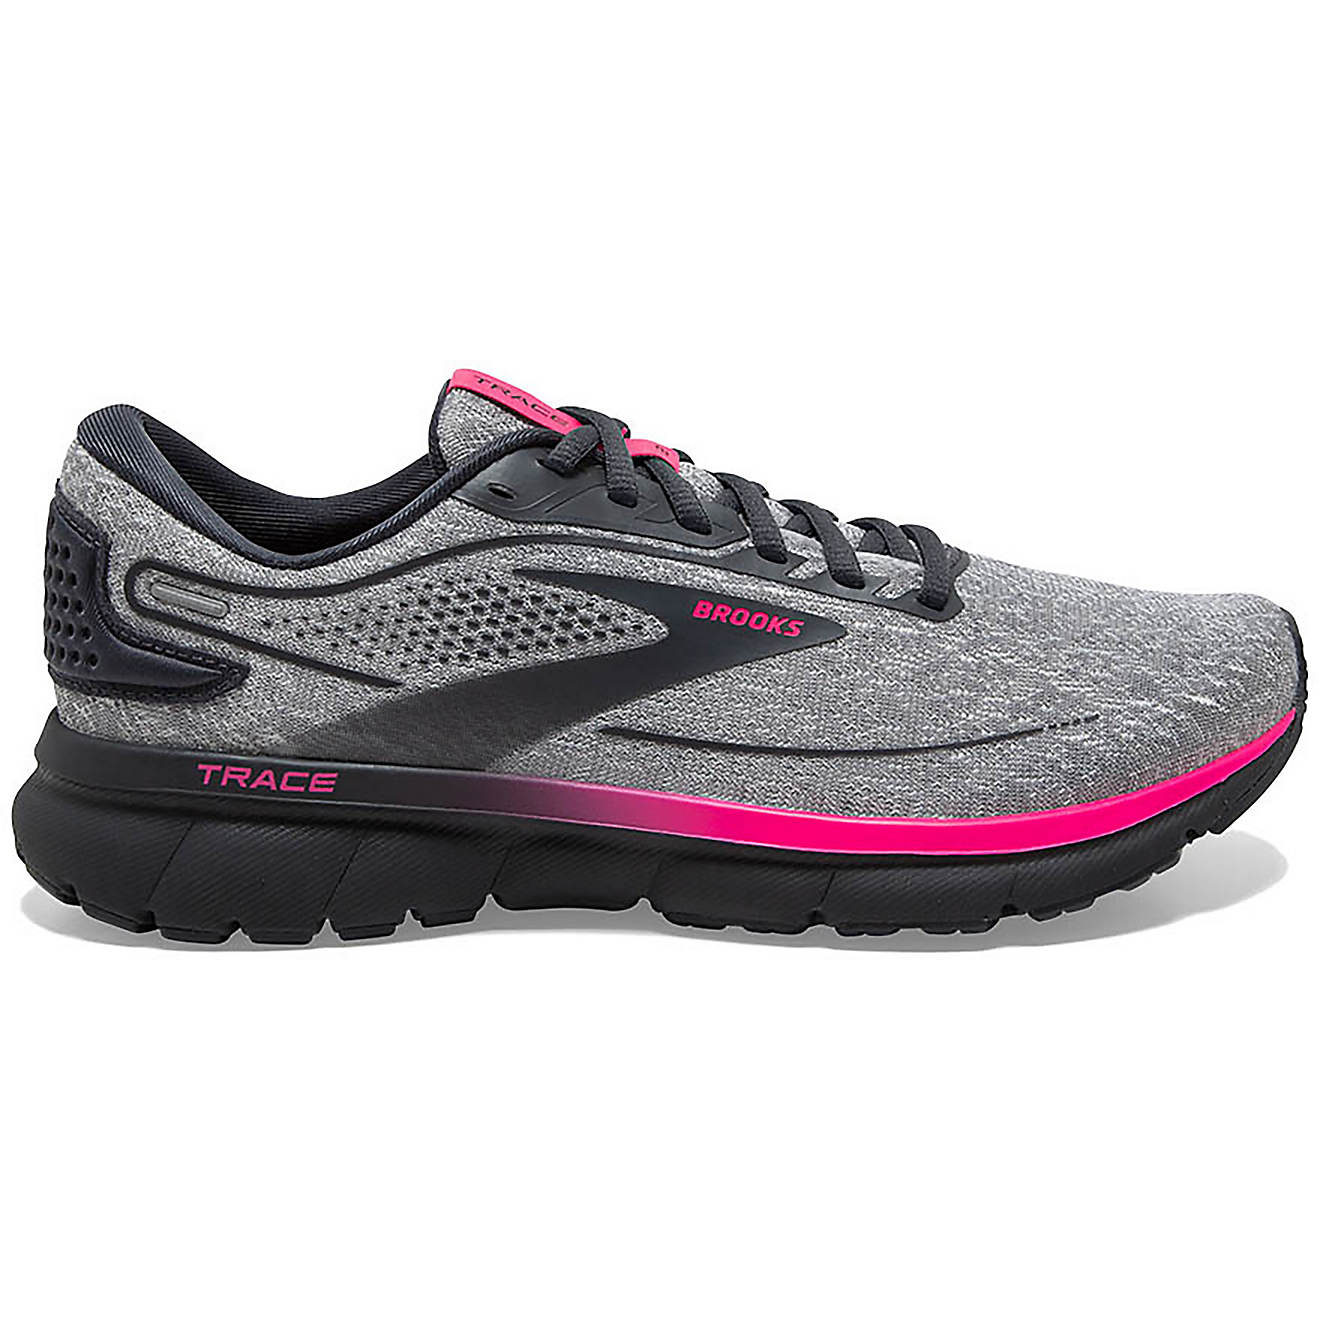 Brooks Women's Trace 2 Running Shoes | Free Shipping at Academy